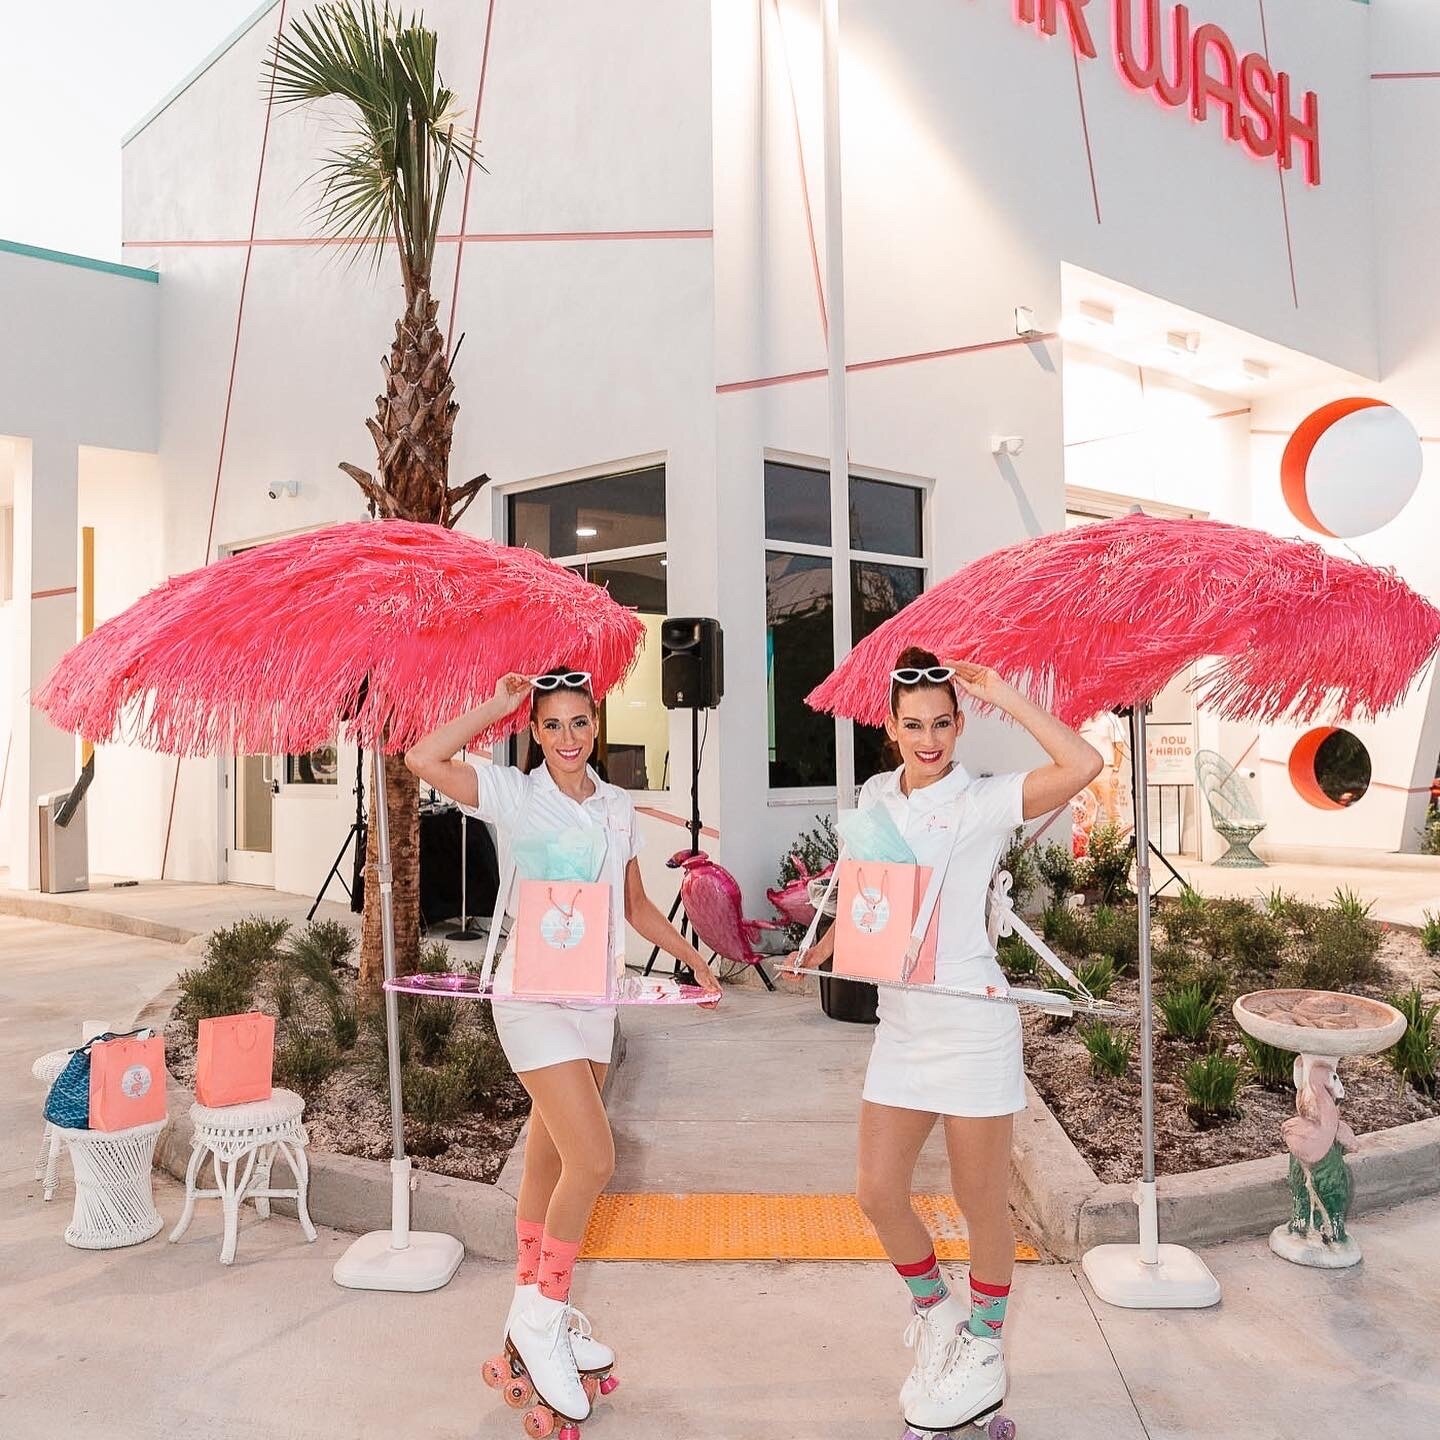 patiently waiting for the final inspections in order to (hopefully) open early next week🤞🏼! in the mean-time, how fun were these 🛼 girls at the party? ⁠
⁠
#PinkBirdCarWash #WashPinkBird #ComingSoon #WestPalmBeach #WaWa #PBI #Belvedere #CarWash #Ex